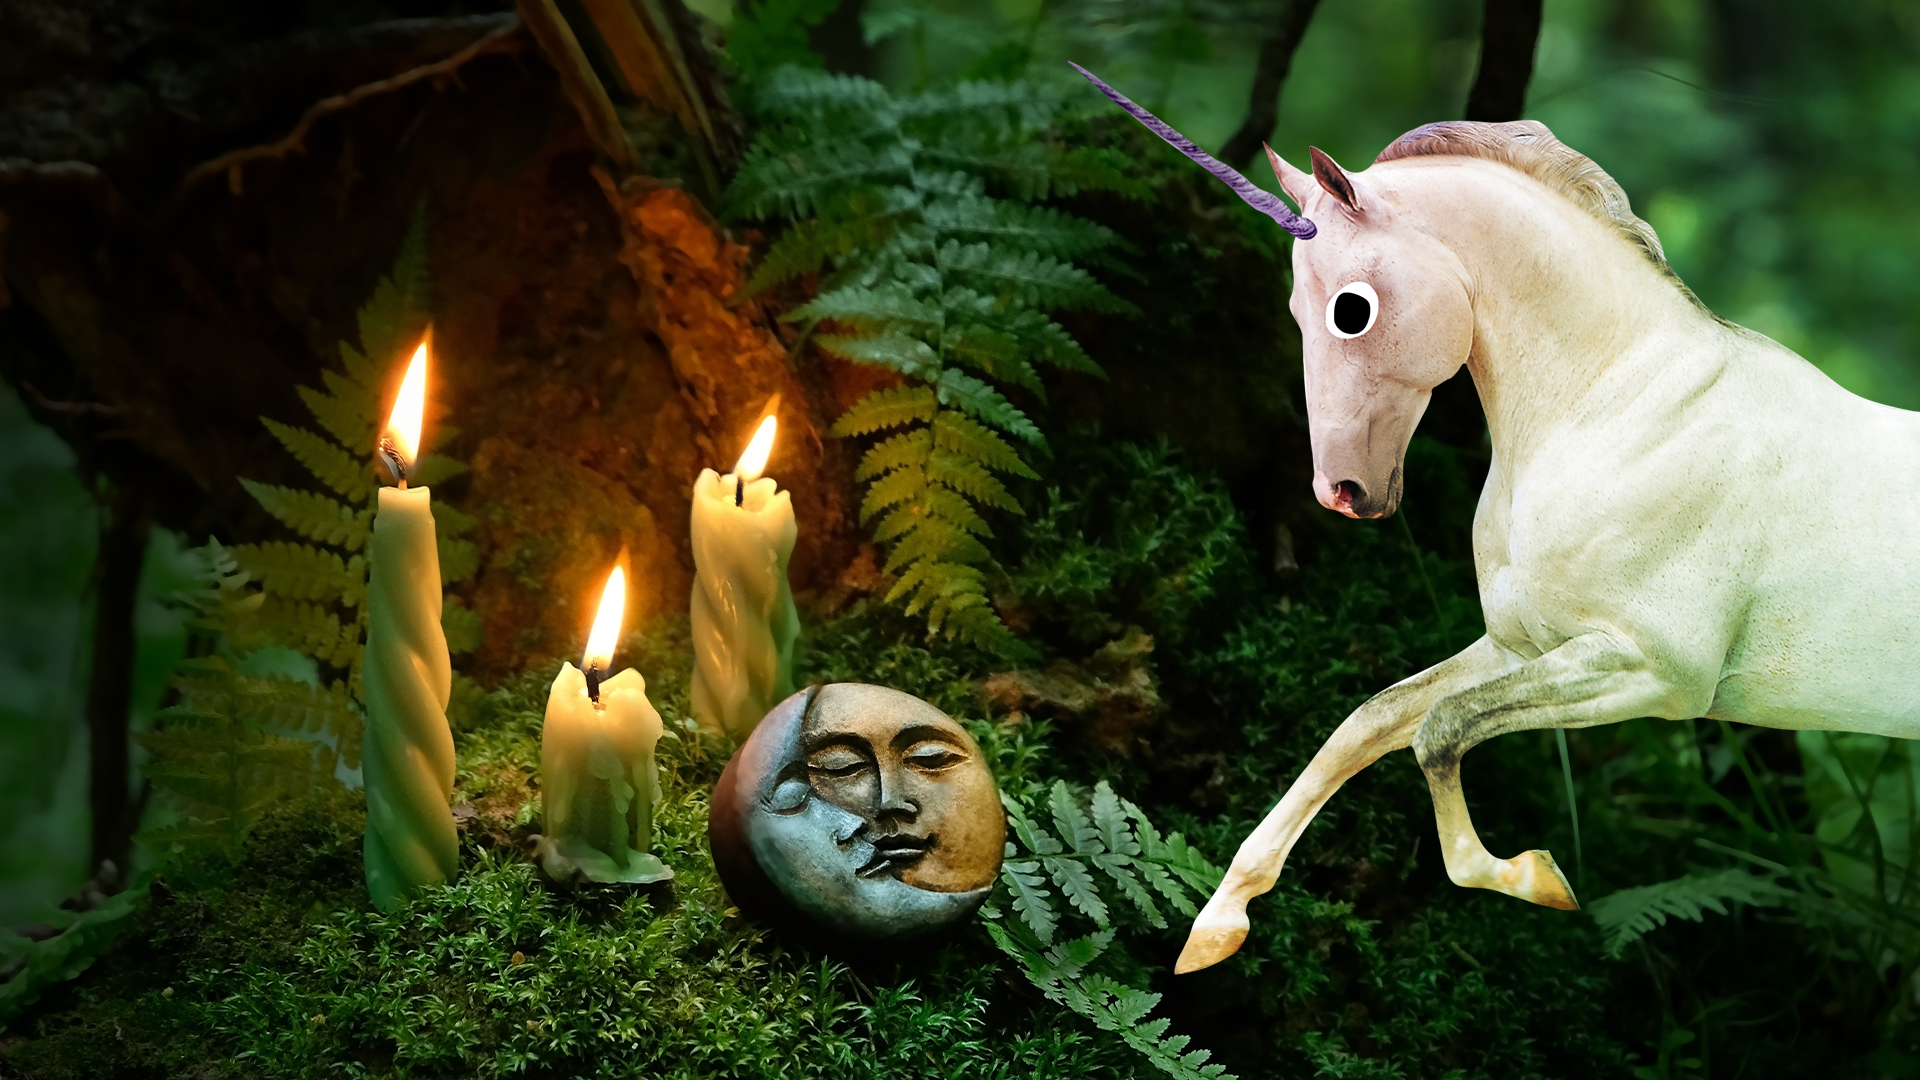 Some candles a moon and a sun in a mossy wood and a Beano unicorn